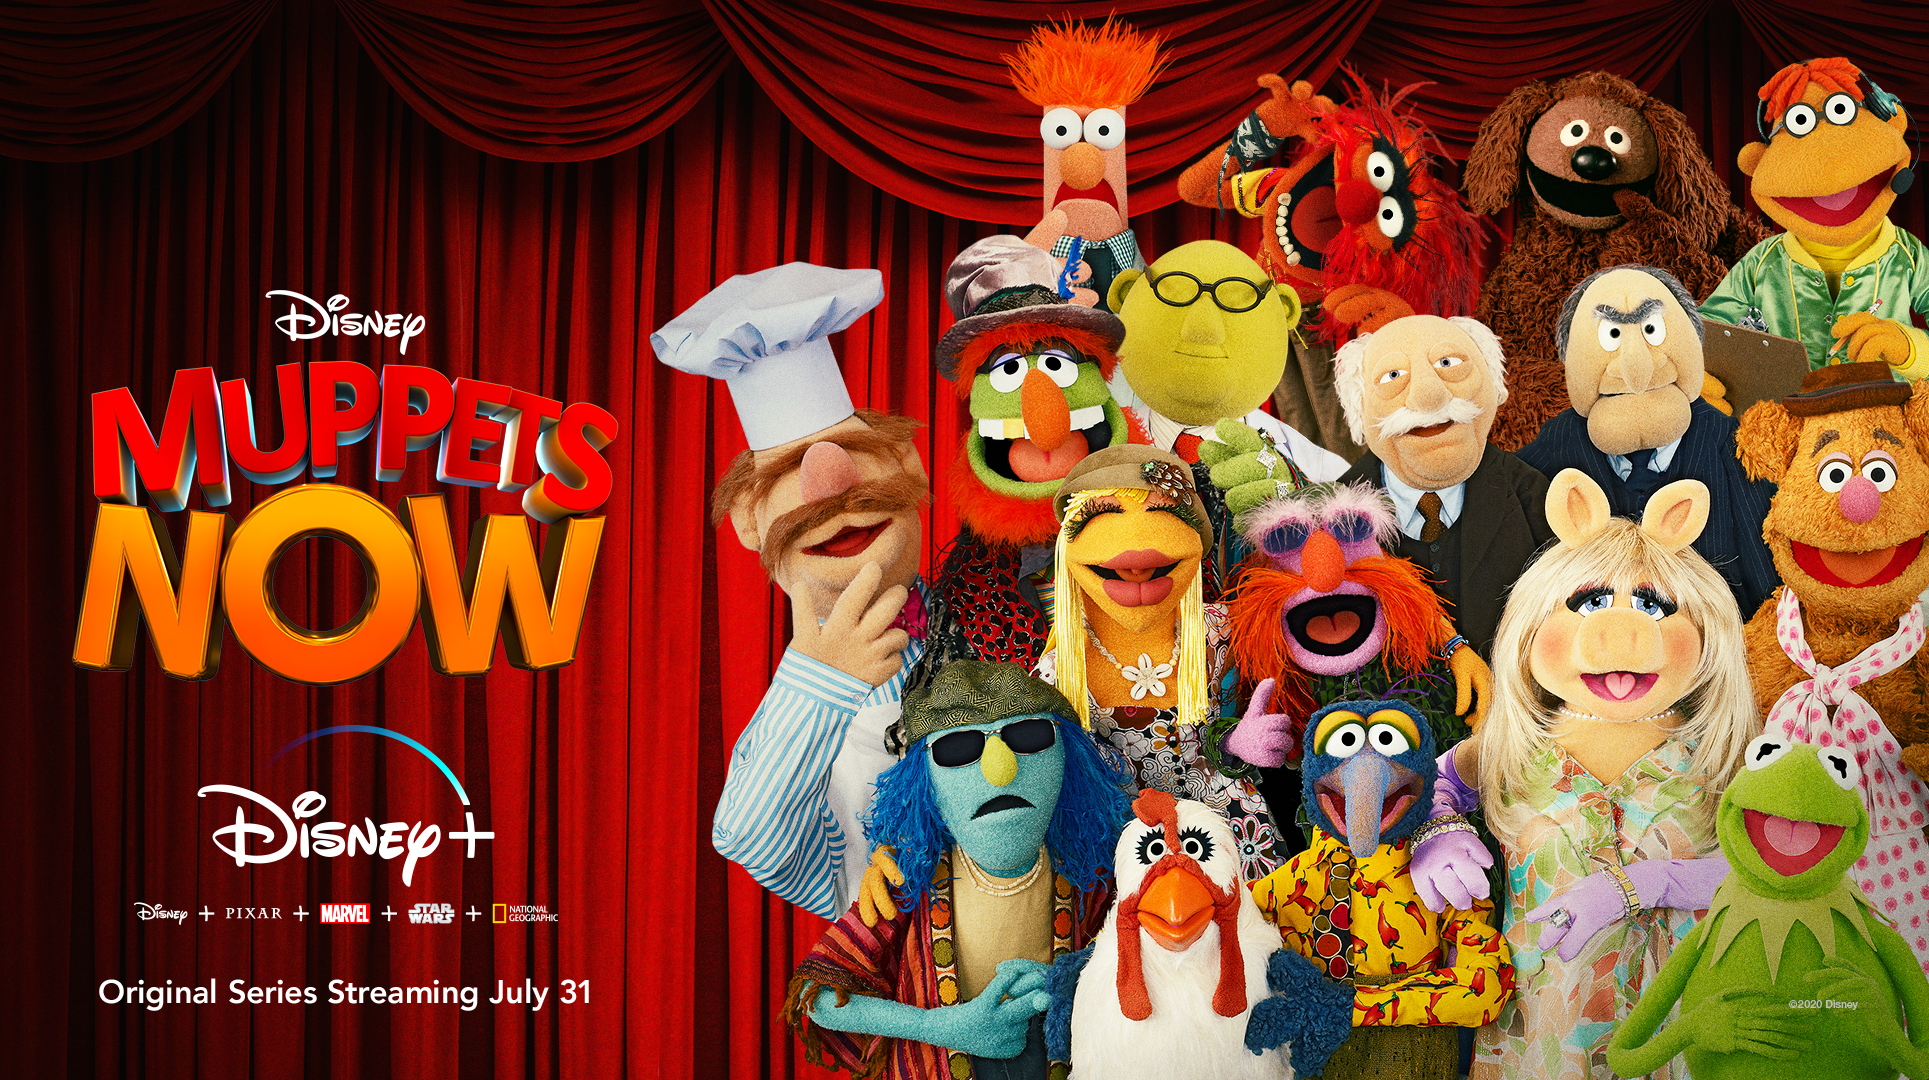 Watch the New Trailer For ‘Muppets Now’ Coming to Disney+ on July 31st